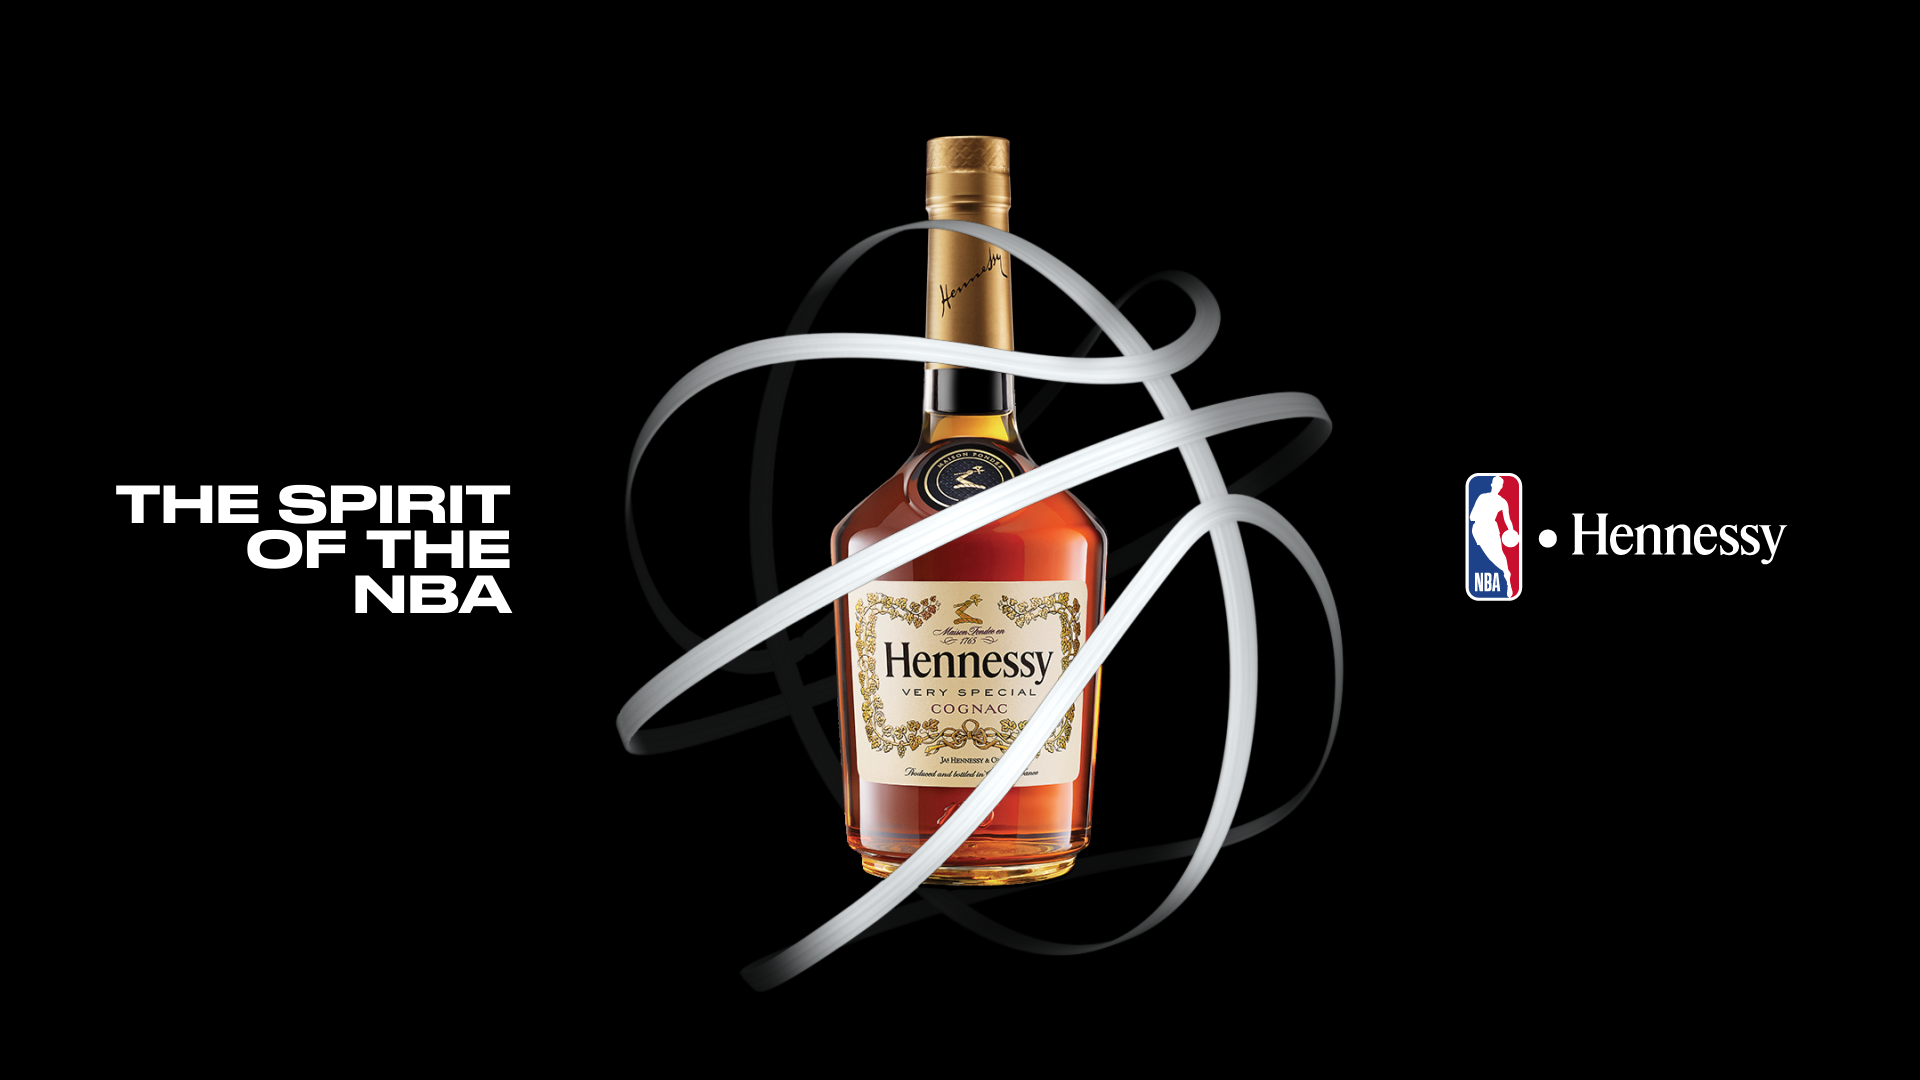 NBA introduces Hennessy as its first global spirit partner